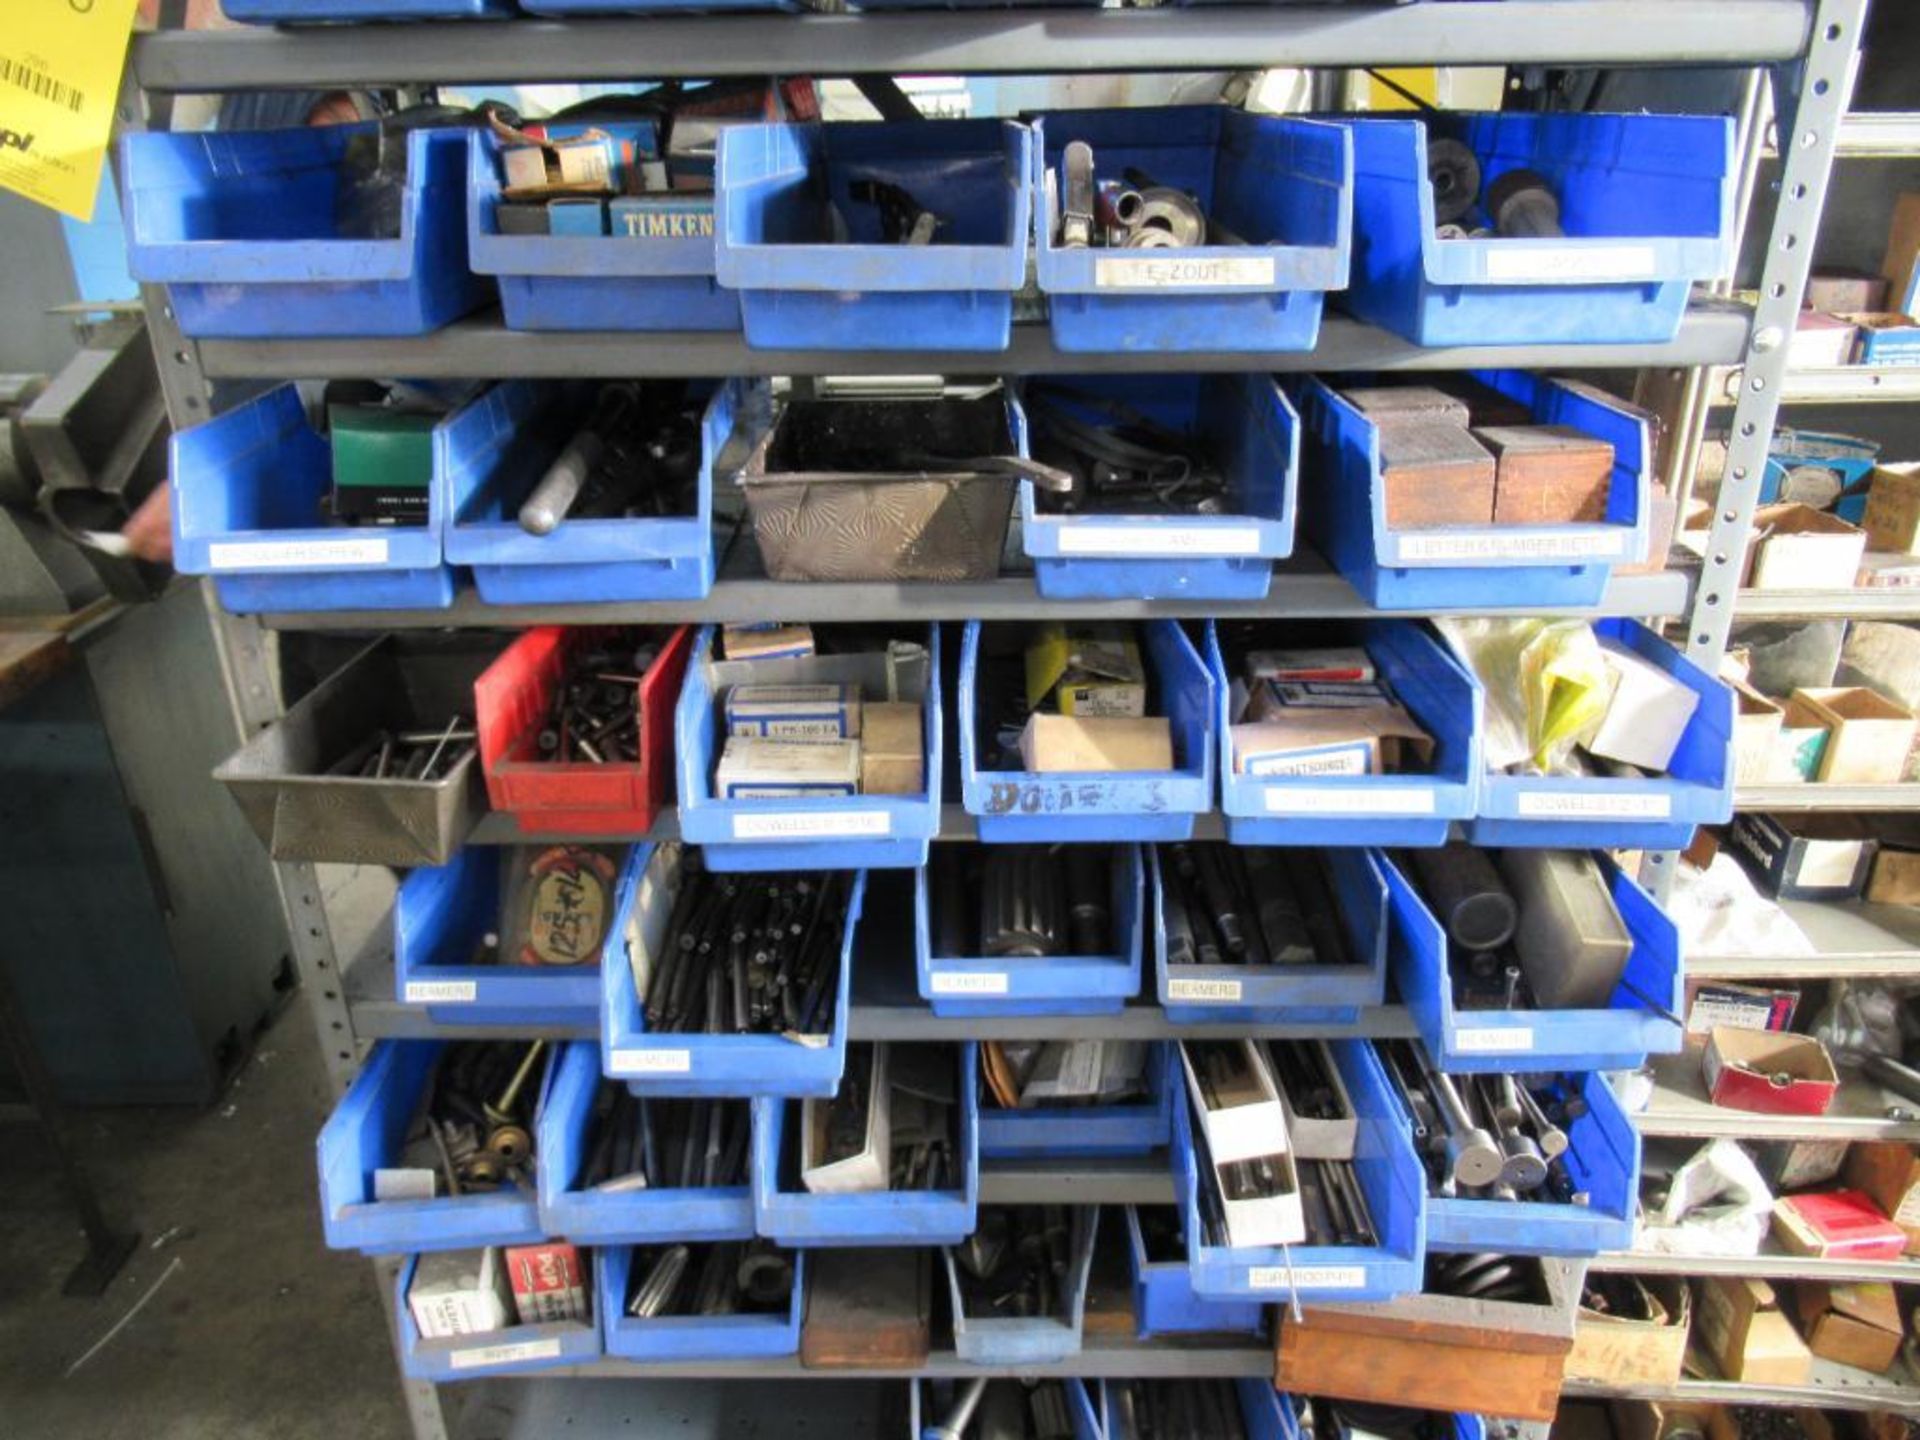 LOT: Shelving Unit w/Contents of Bearings, Machine Parts, Hand Tools, Stamp Kits, etc. - Image 3 of 4